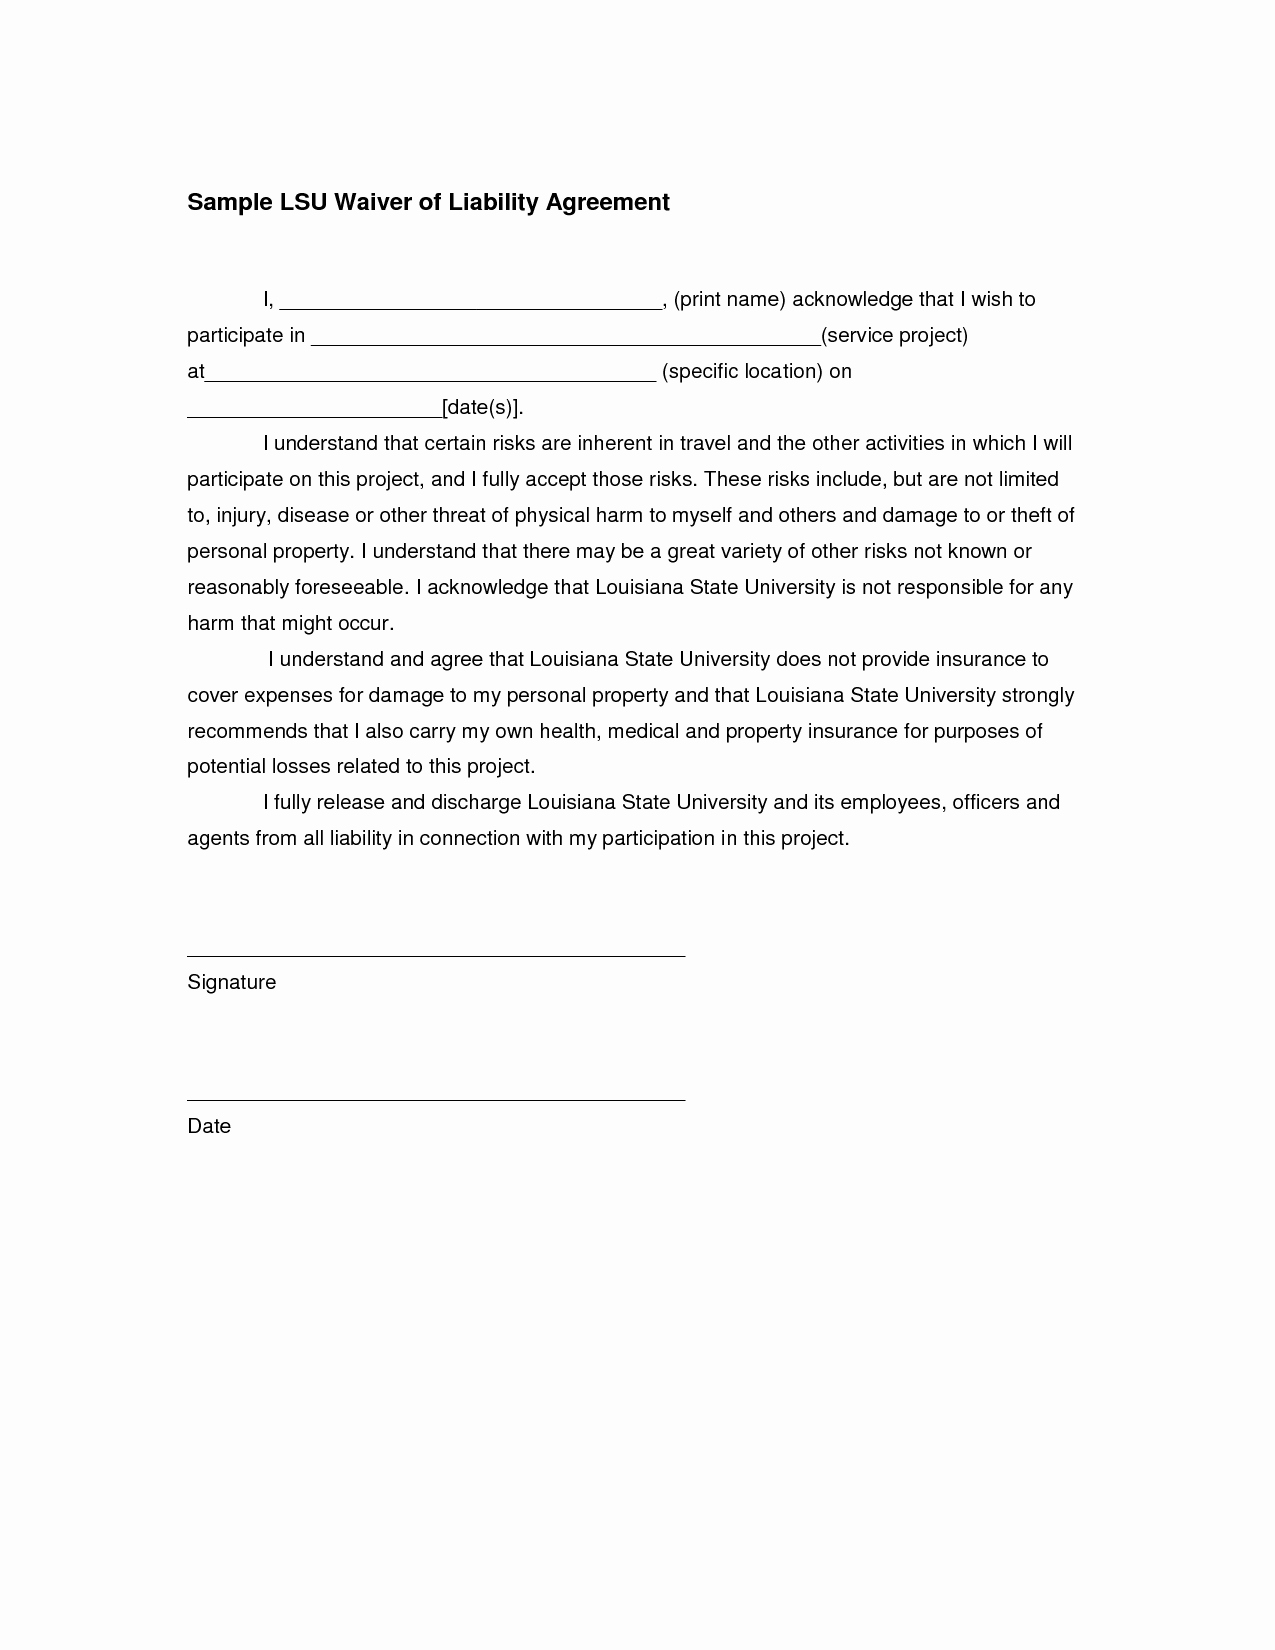 Liability form Template Free New Liability Release form Template In Images Waiver Of